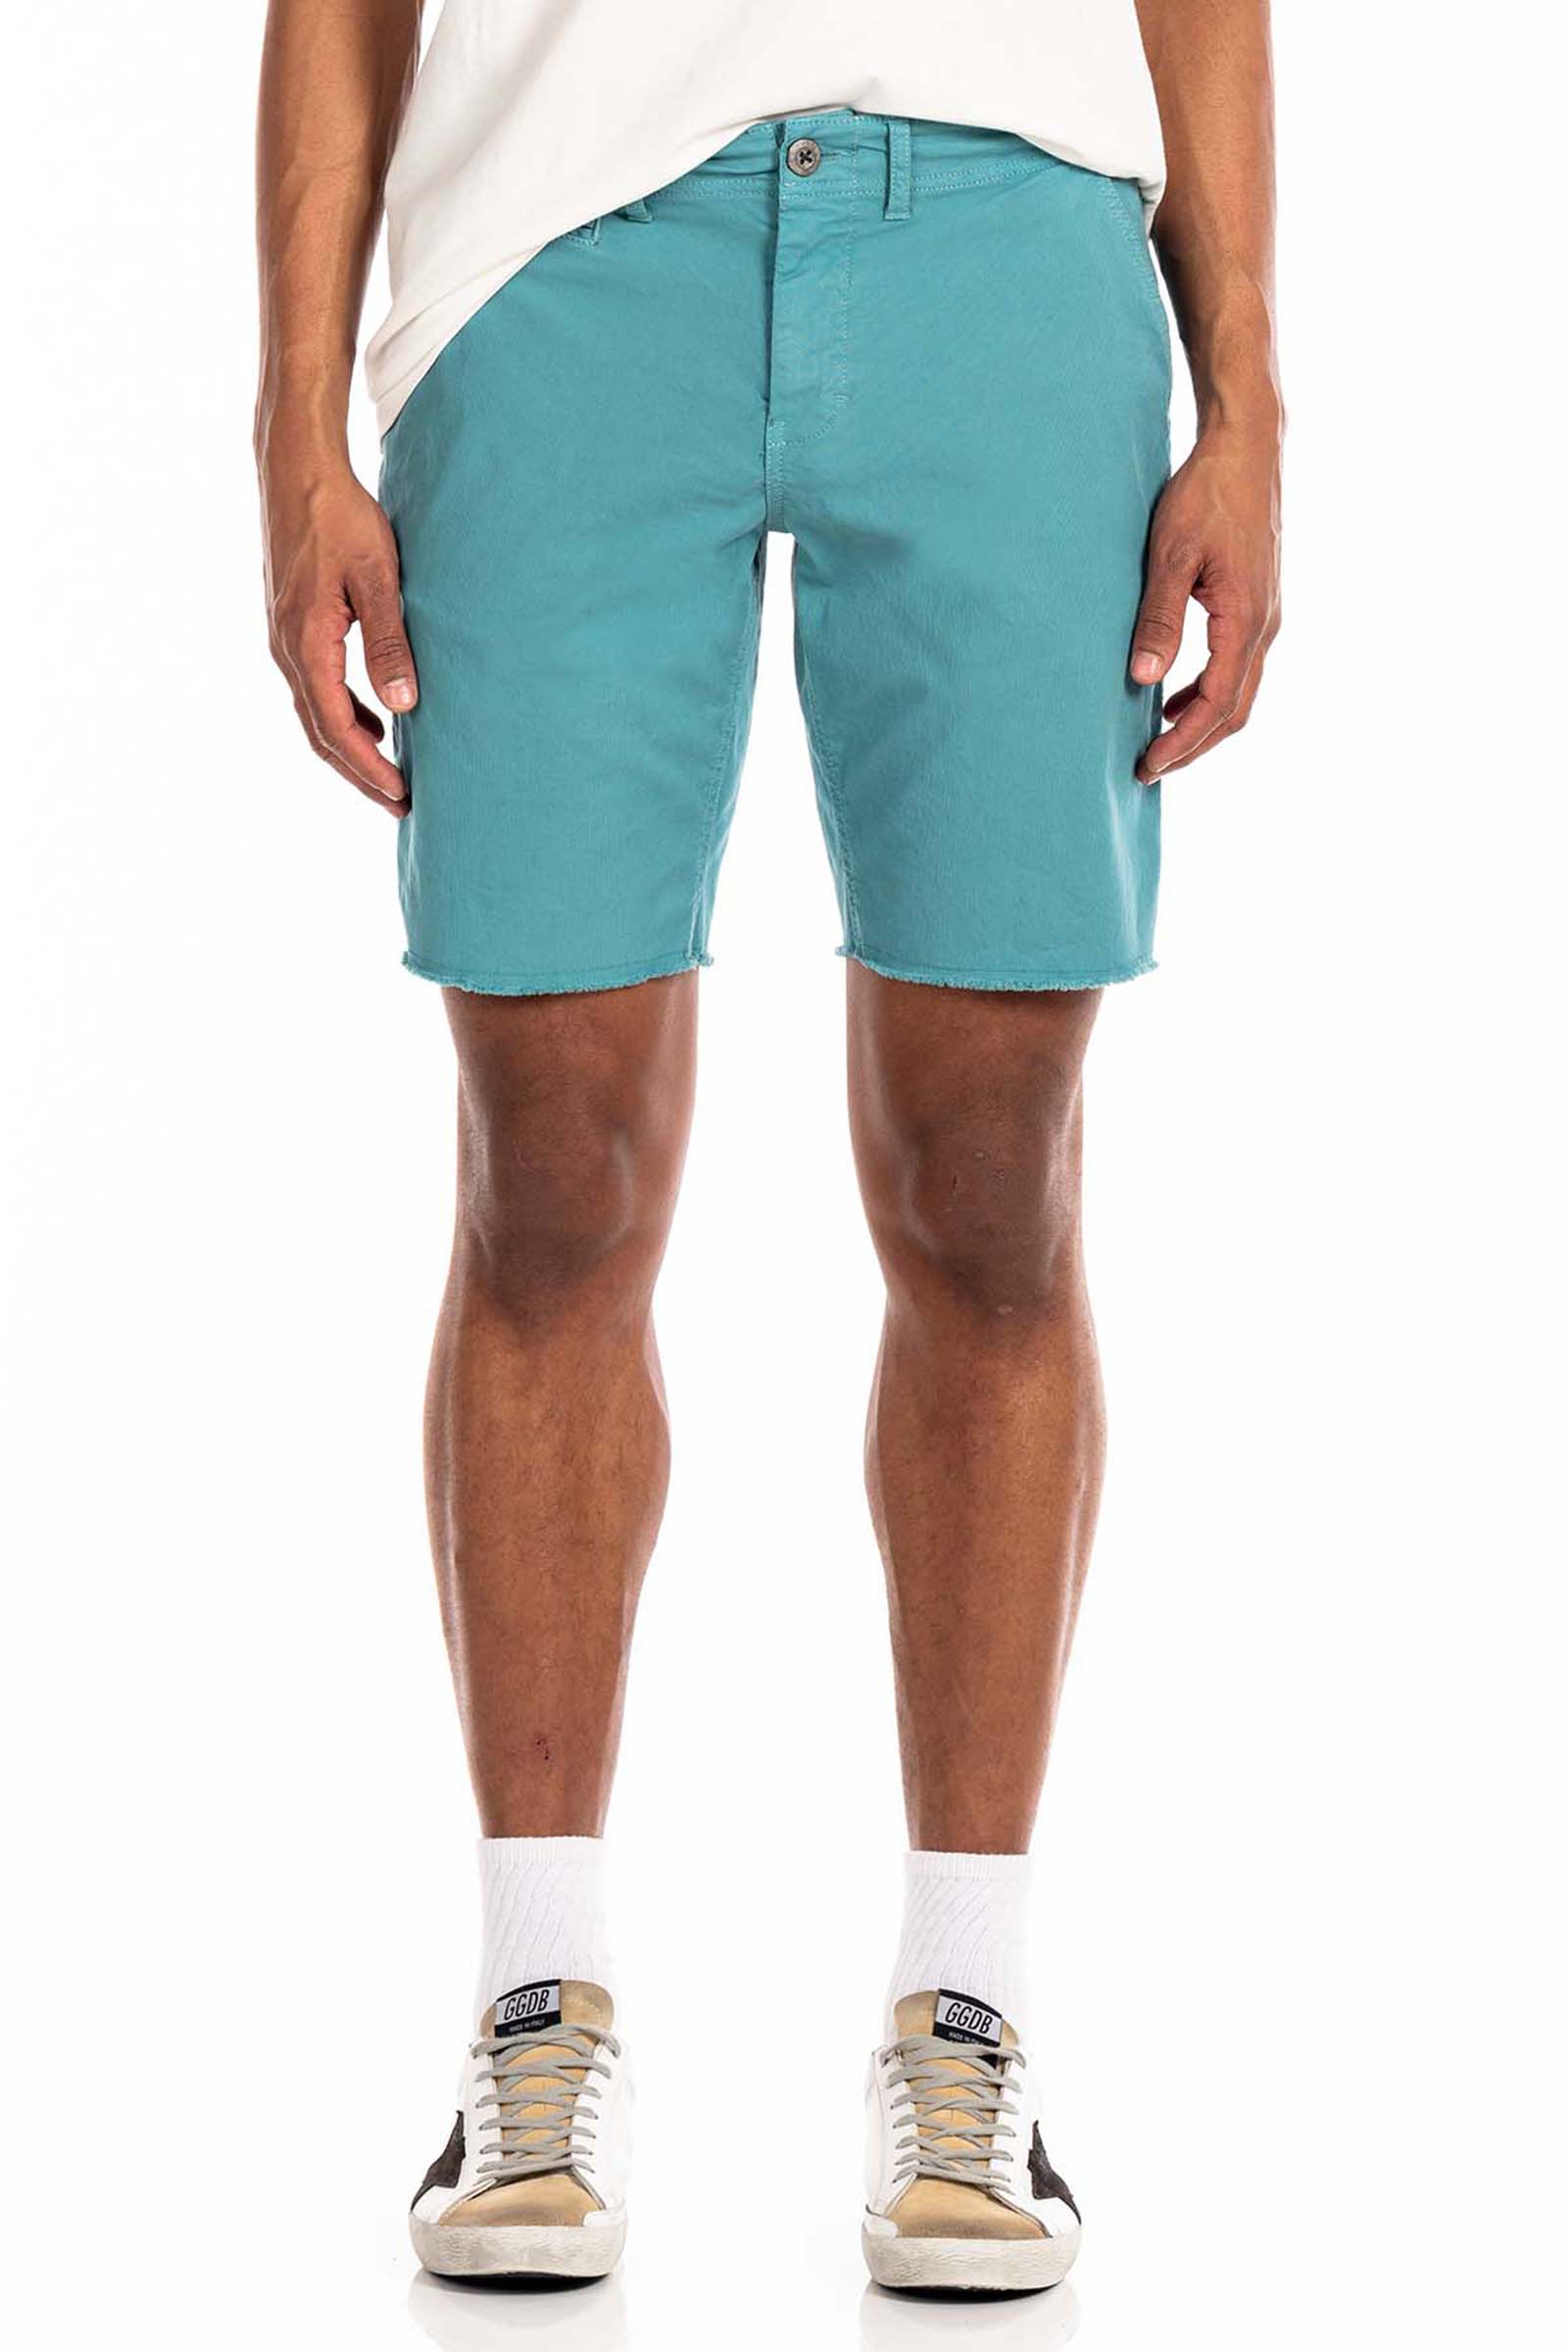 Original Paperbacks Brentwood Chino Short in Spearmint on Model Cropped Front View